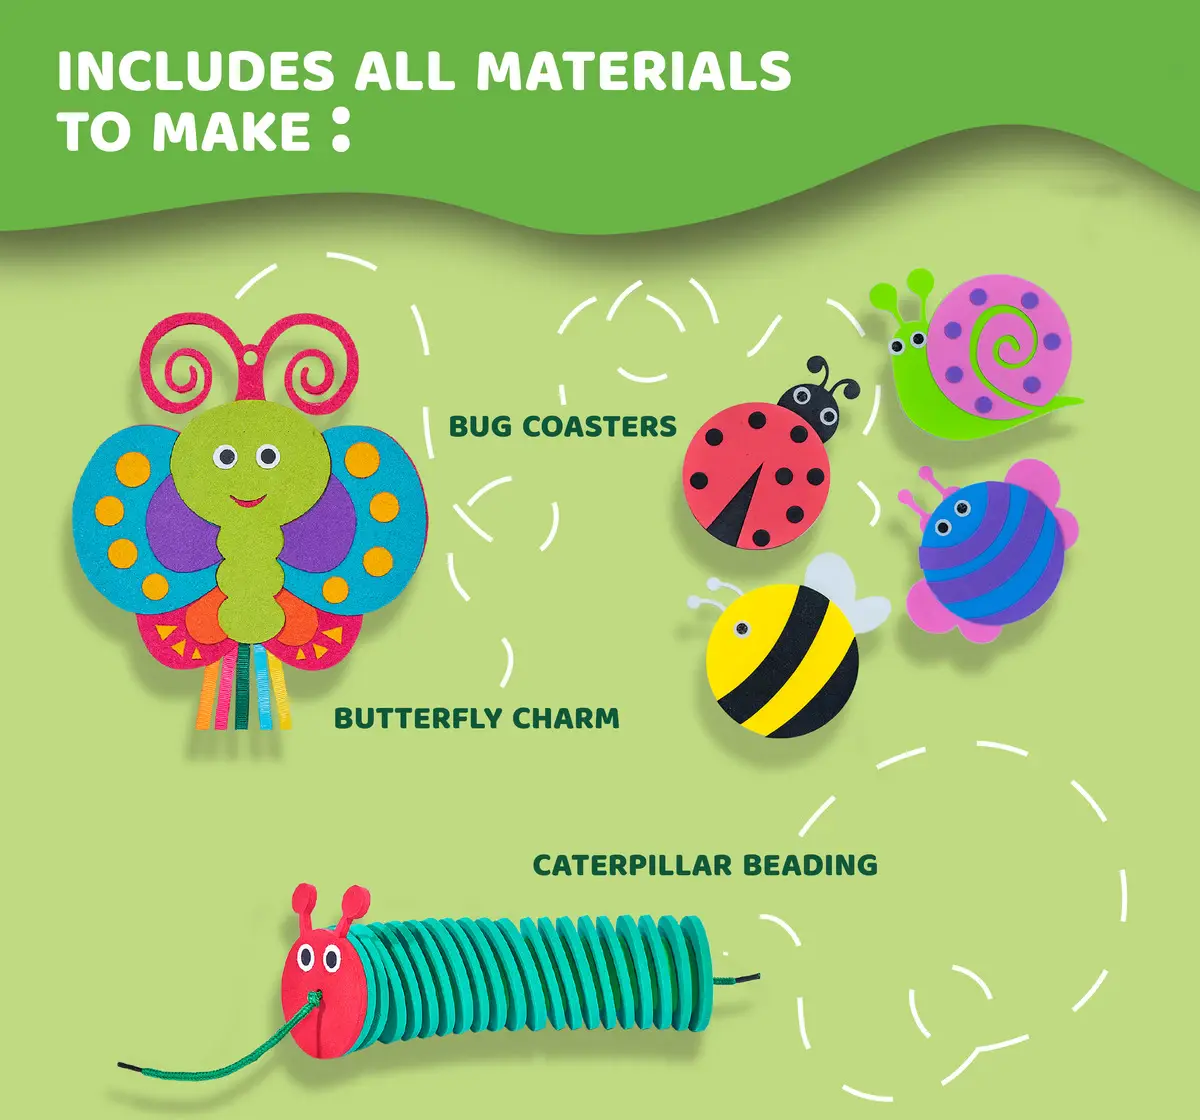 Jack In The Box Bugs and Bees Themed Art and Craft 3-in-1 Kit For Kids of Age 3Y+, Multicolour